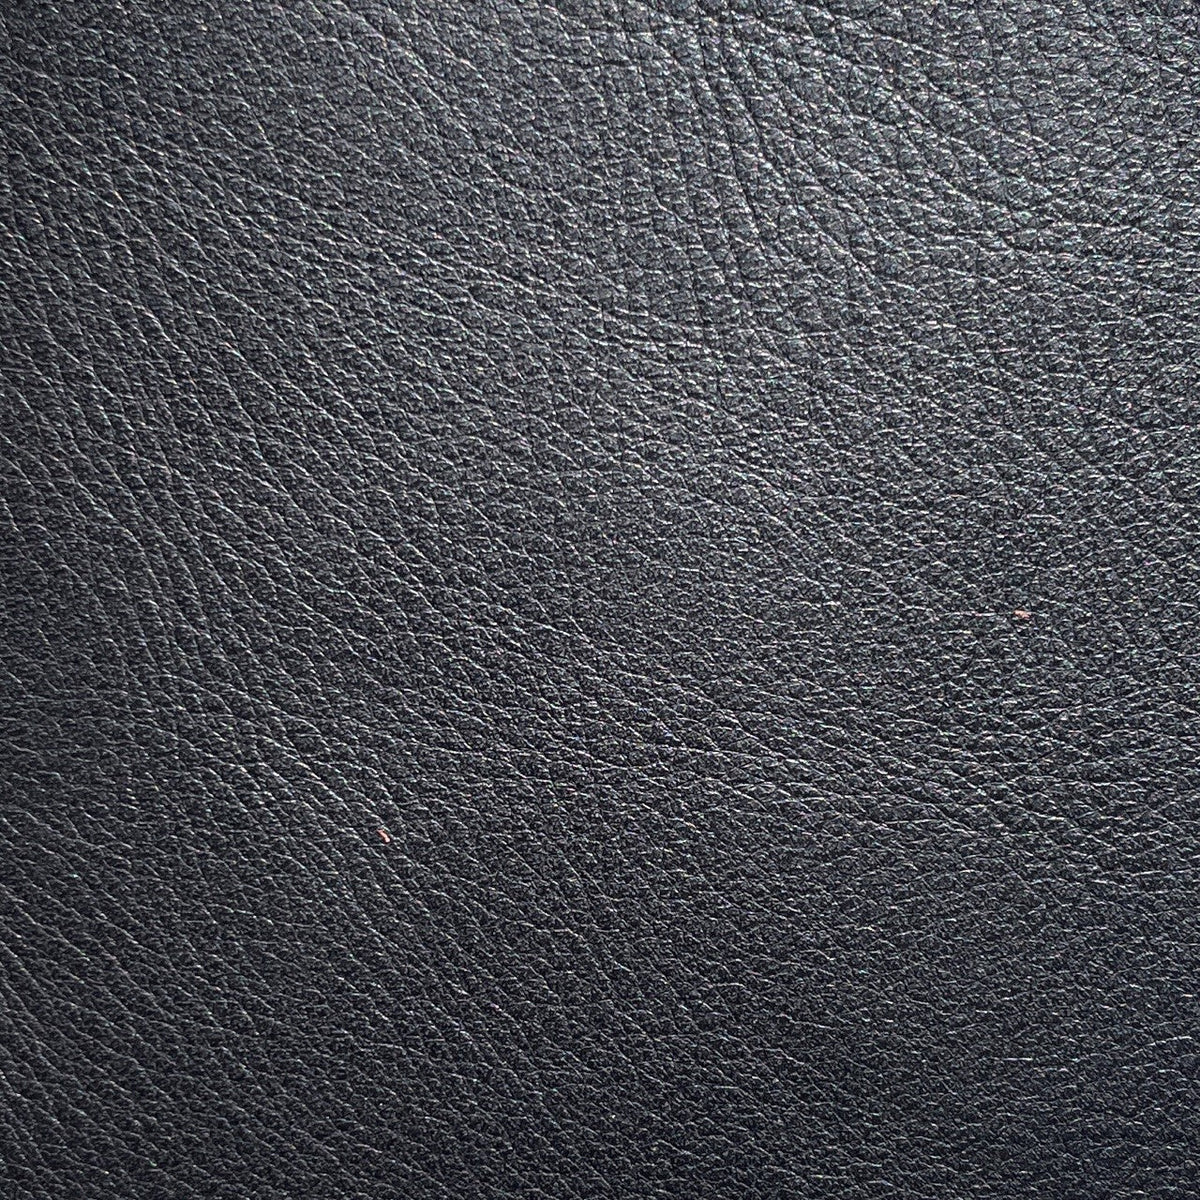 Olympia Cow Half Side | Black | 1.5 mm | 10.5 sq.ft | From $160 ea.